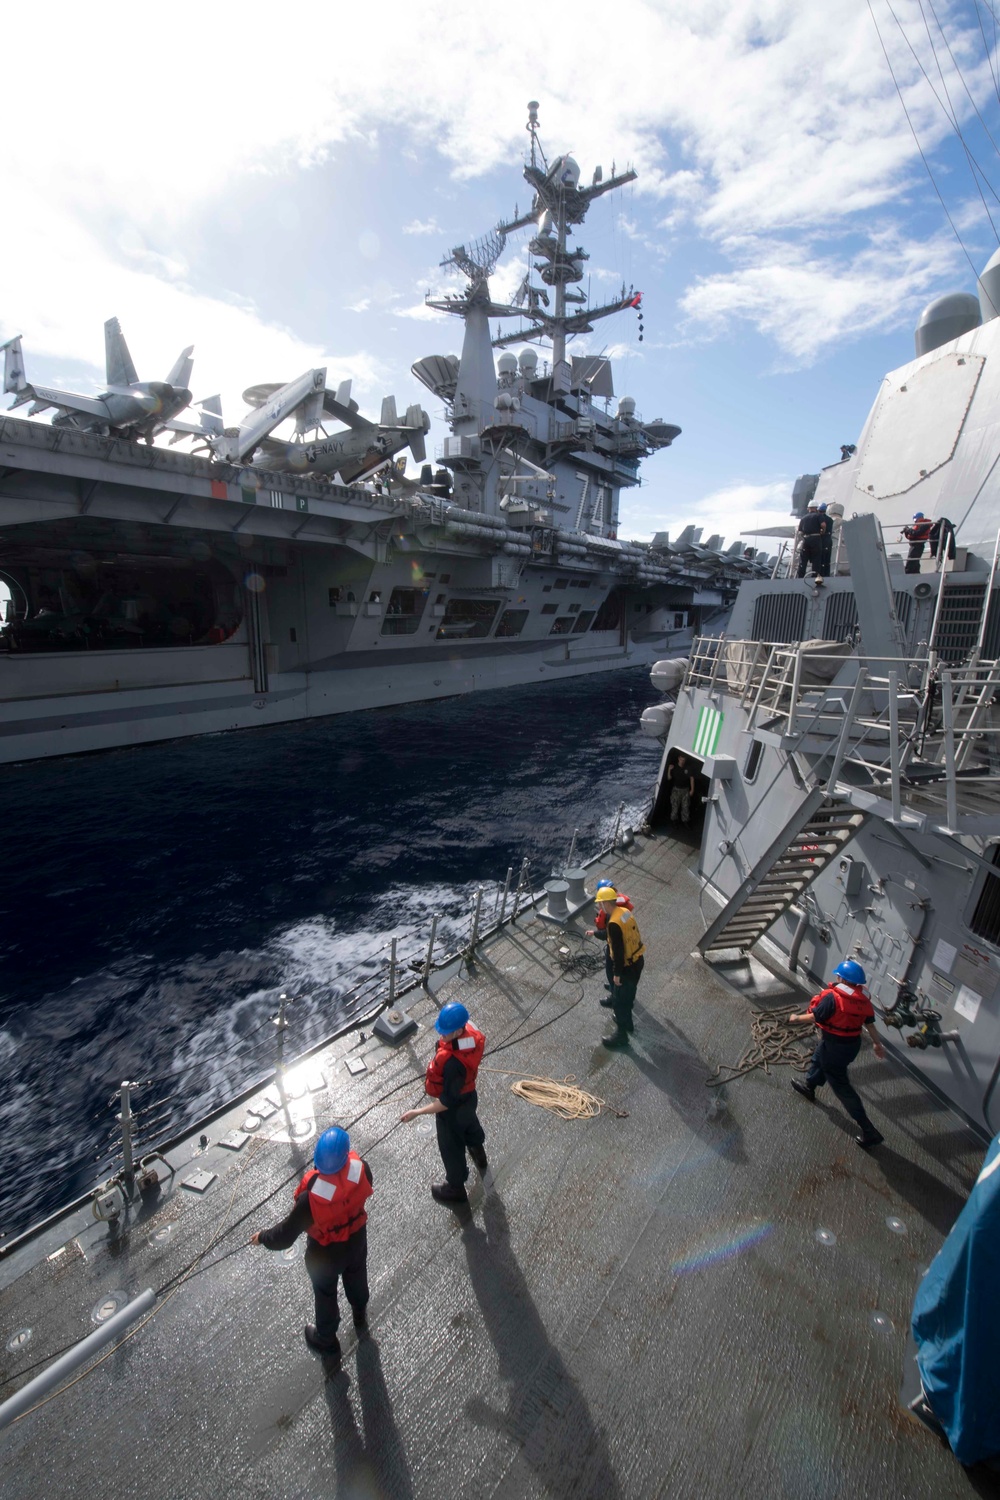 Spruance conducts routine operations in the U.S. 3rd Fleet area of operations.